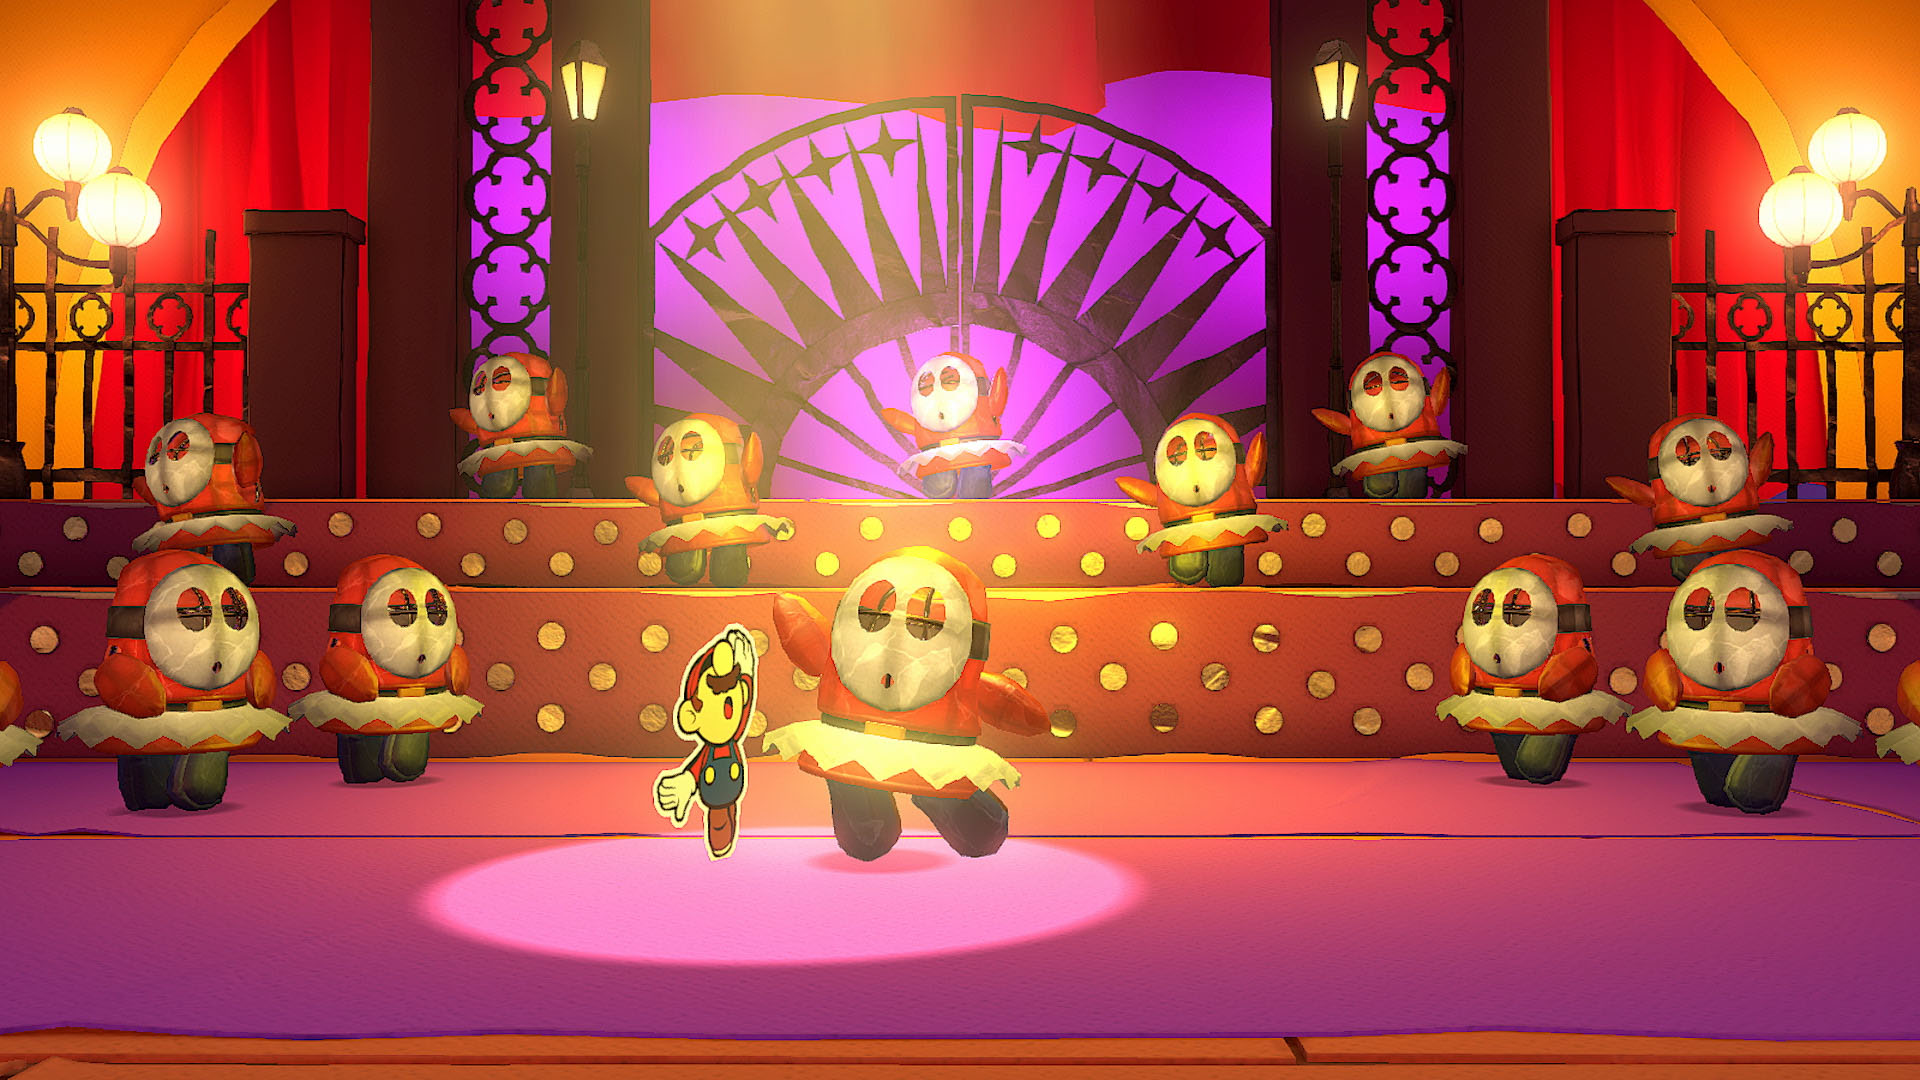 Mario dancing on stage with a bunch of mechanical Shy Guys in tutus